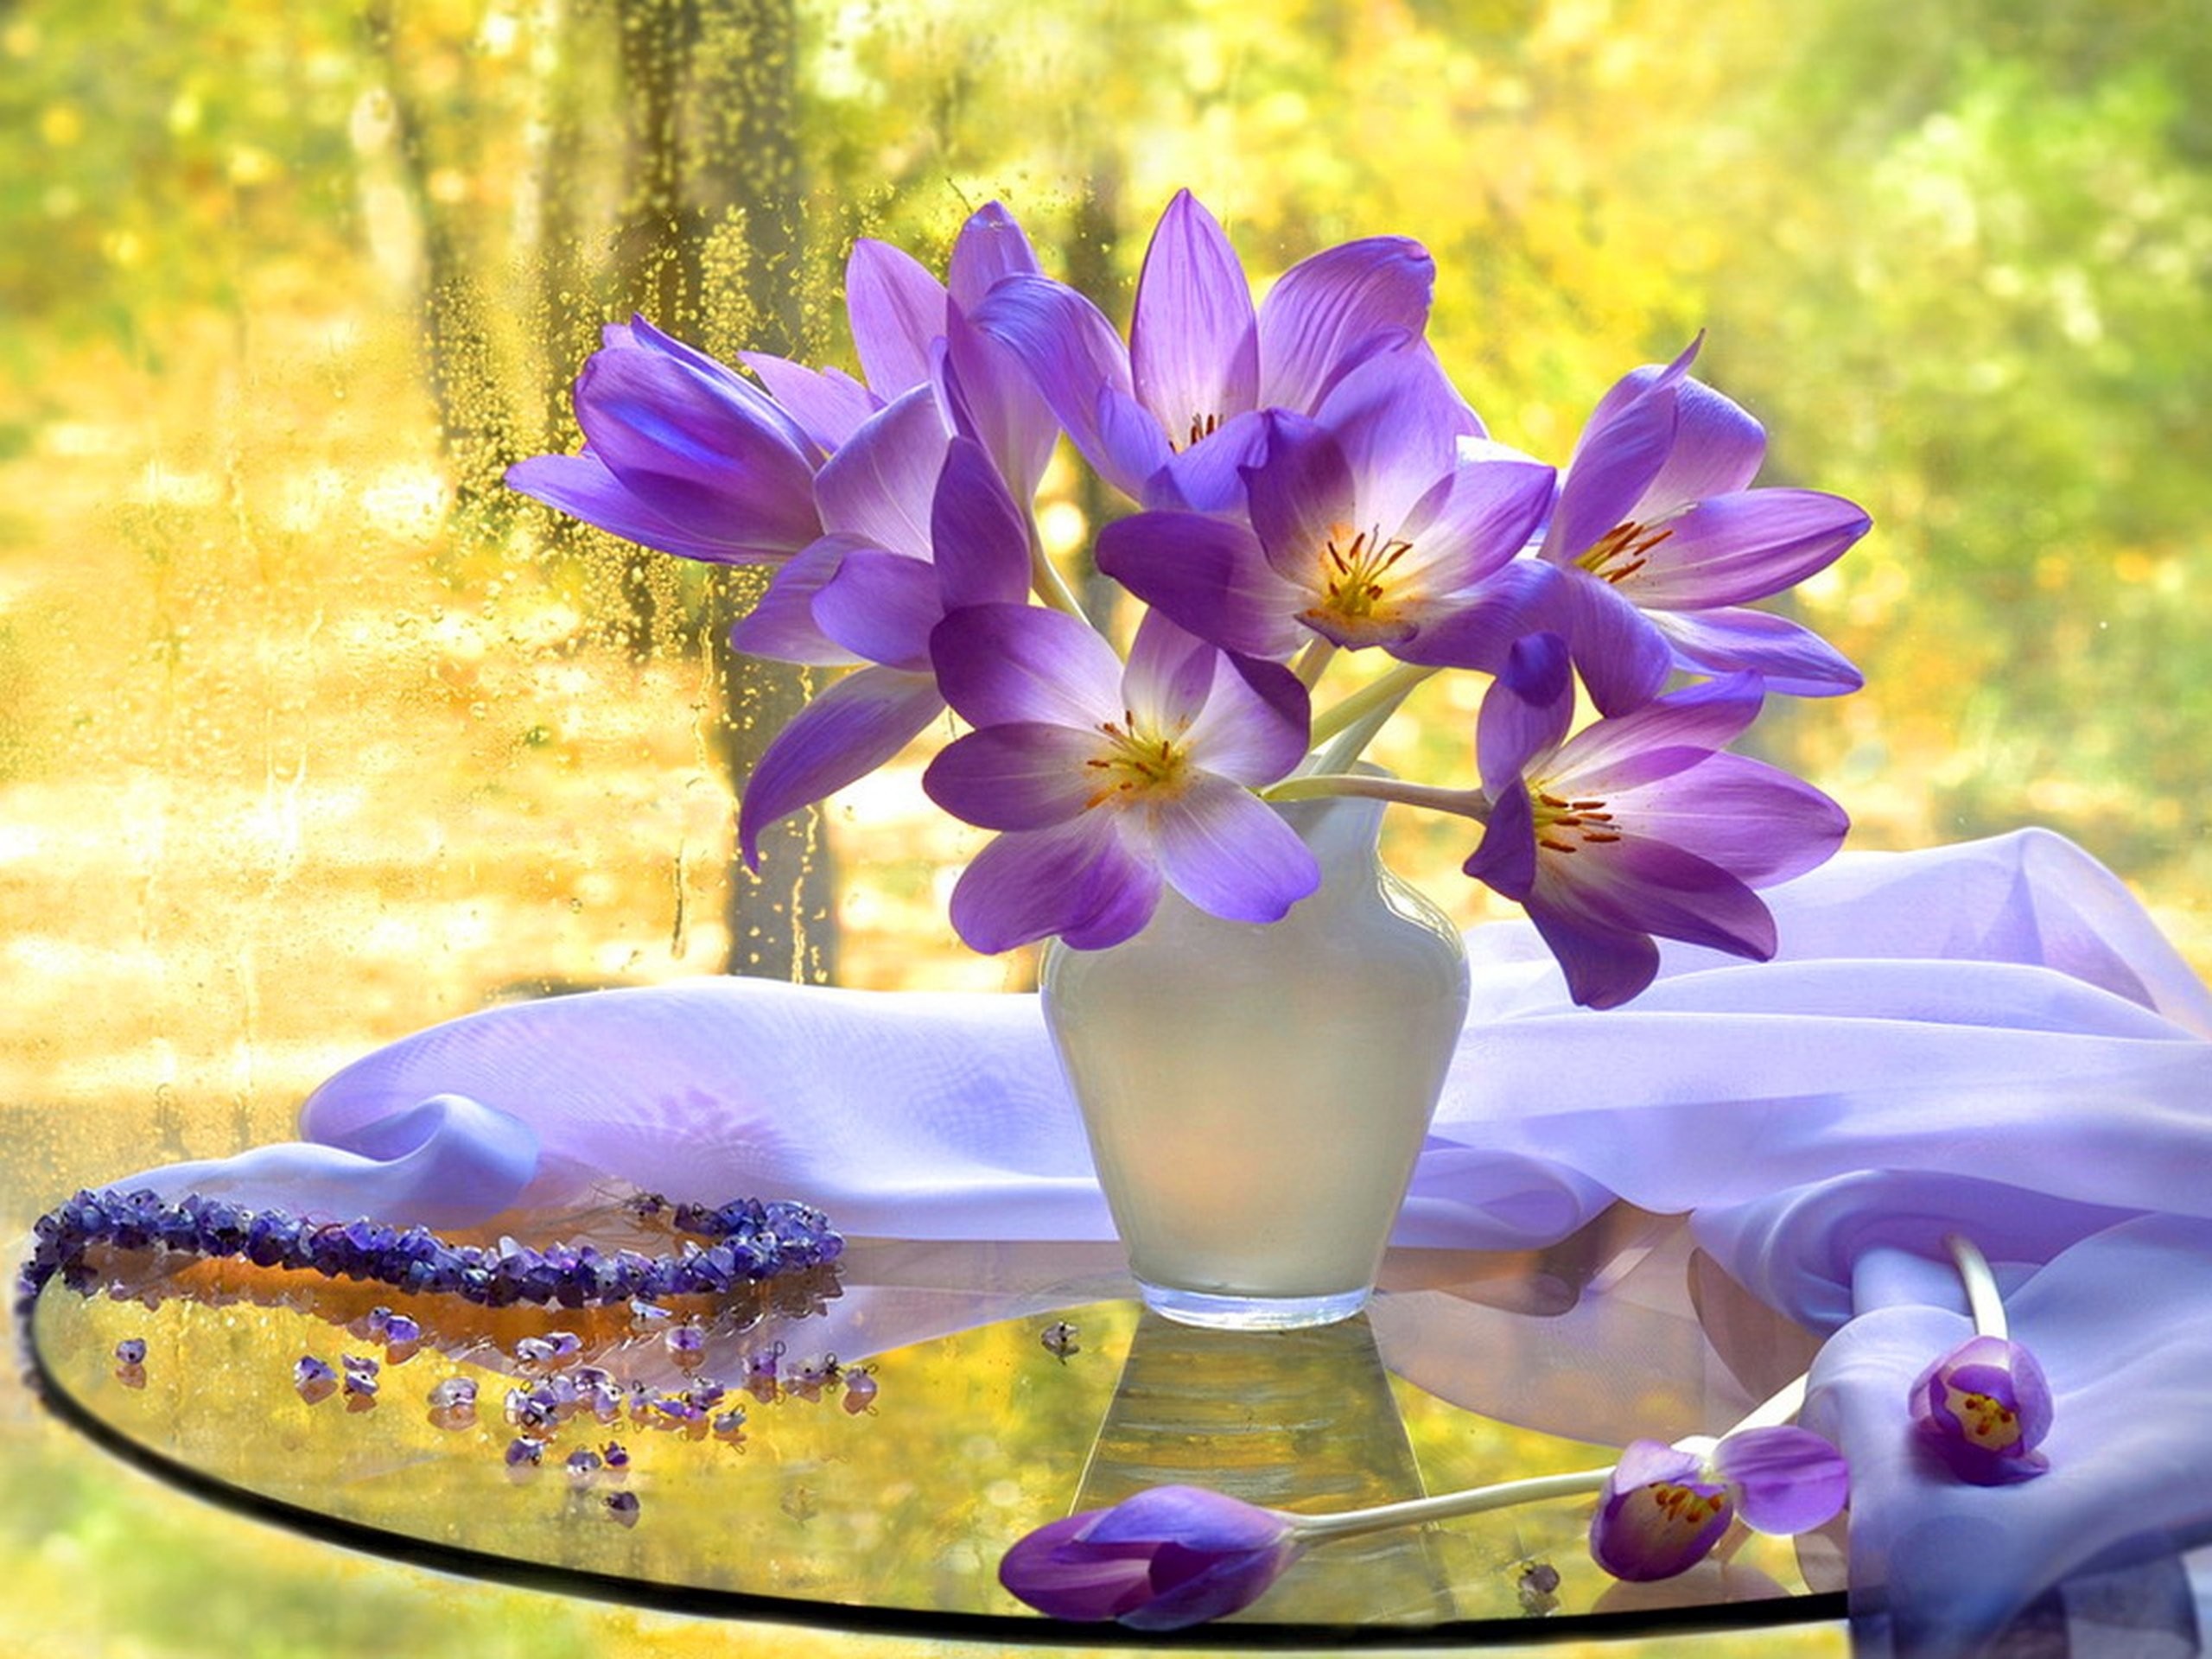 2560x1920 Beautiful flowers autumn tender view delicate harmony vase nature bouquet  still life window pretty wallpaper |  | 475990 | WallpaperUP